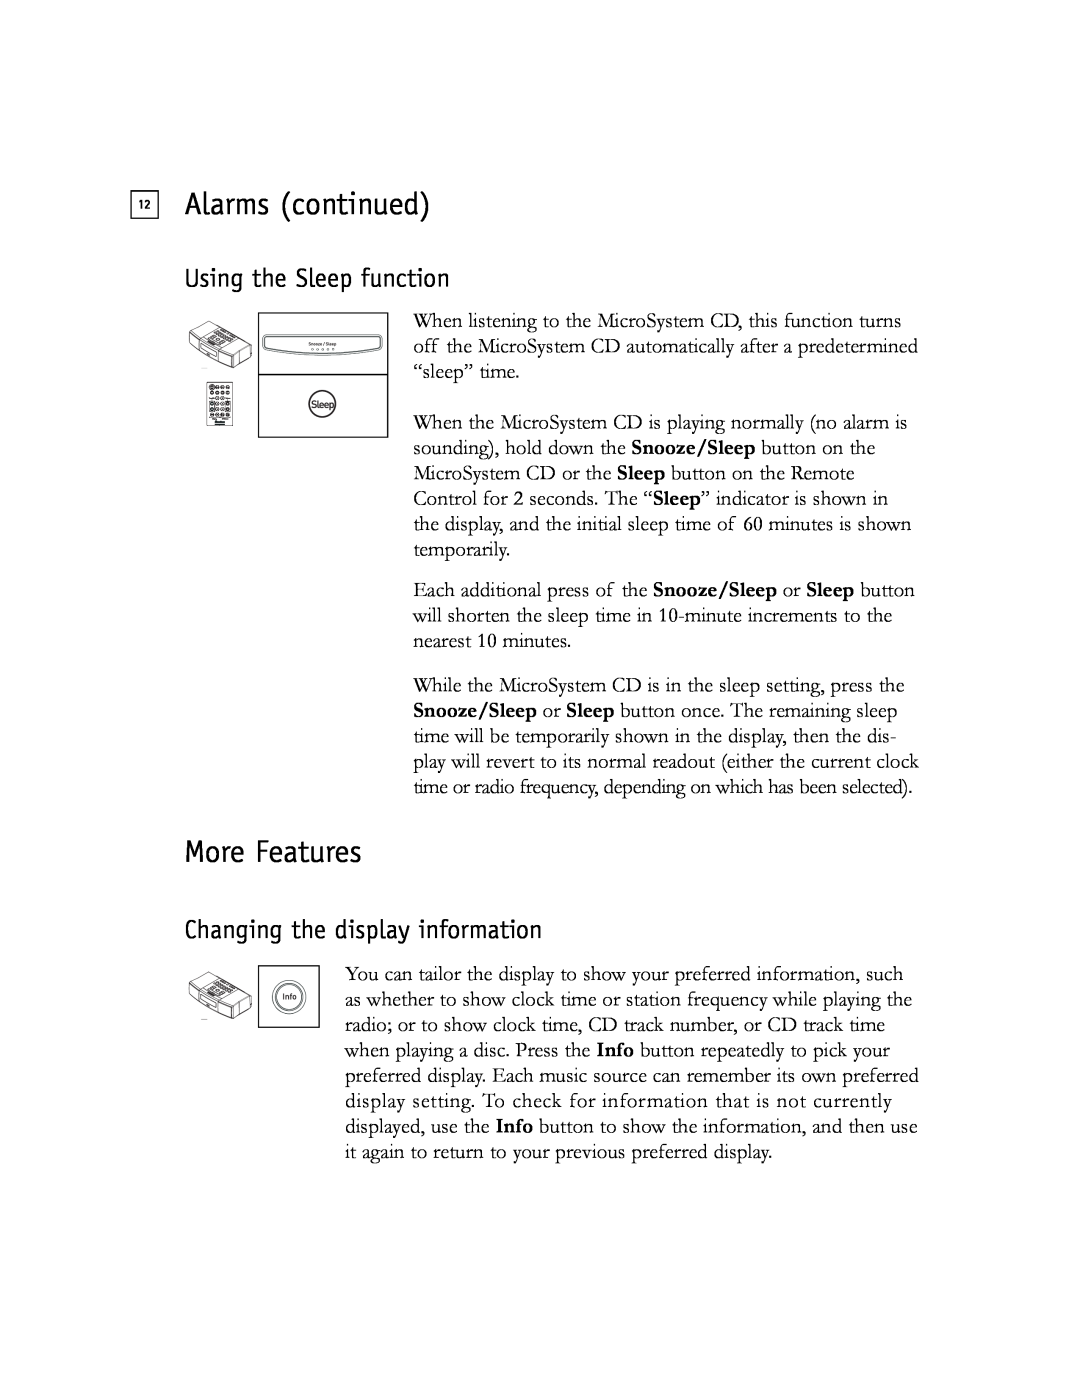 Boston Acoustics Shelf Stereo System owner manual More Features, Using the Sleep function, Changing the display information 